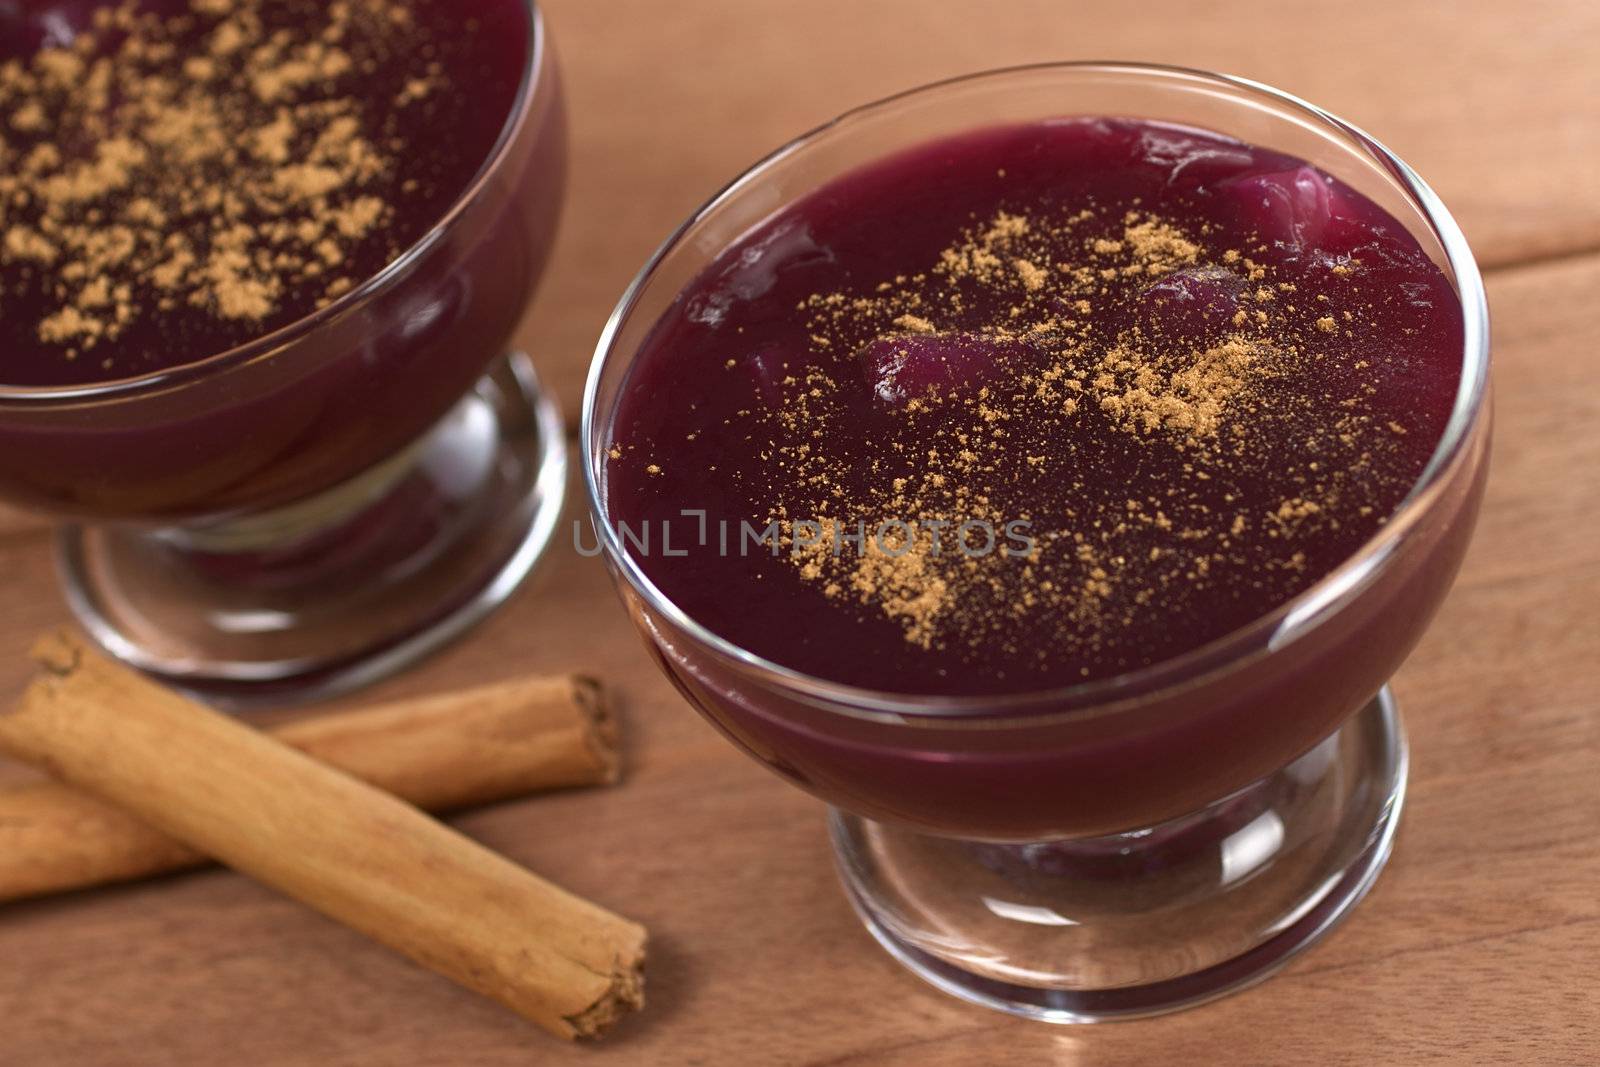 Popular Peruvian desserts called Mazamorra Morada (made out of purple corn) with cinnamon sticks (Selective Focus, Focus in the middle of the dessert in the front)